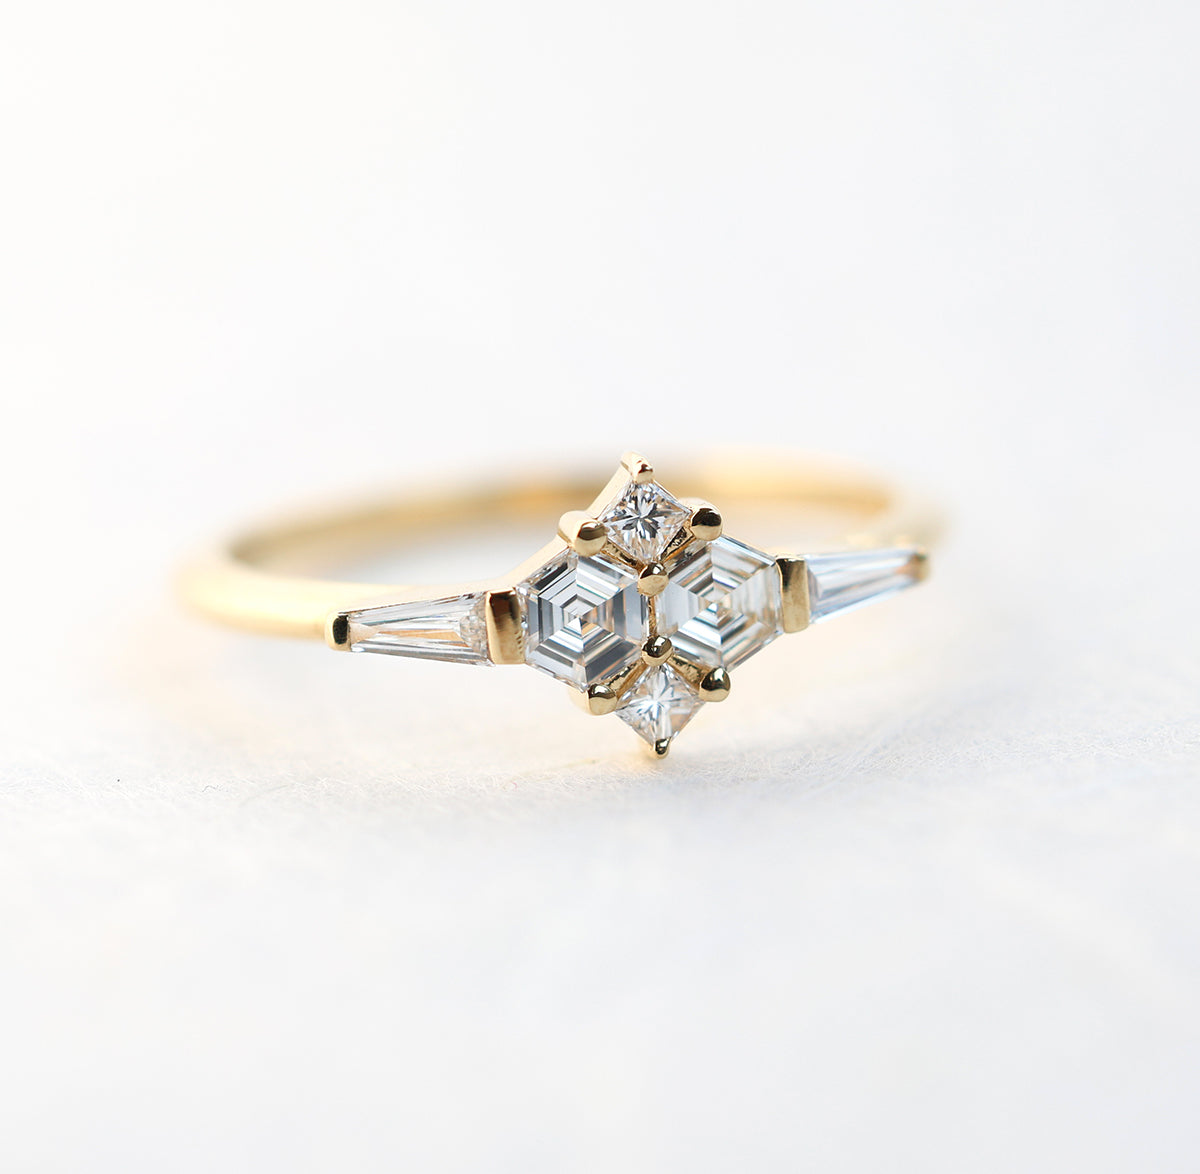 Art Deco era inspired Diamond Cluster Ring with a variety shapes of White Diamonds